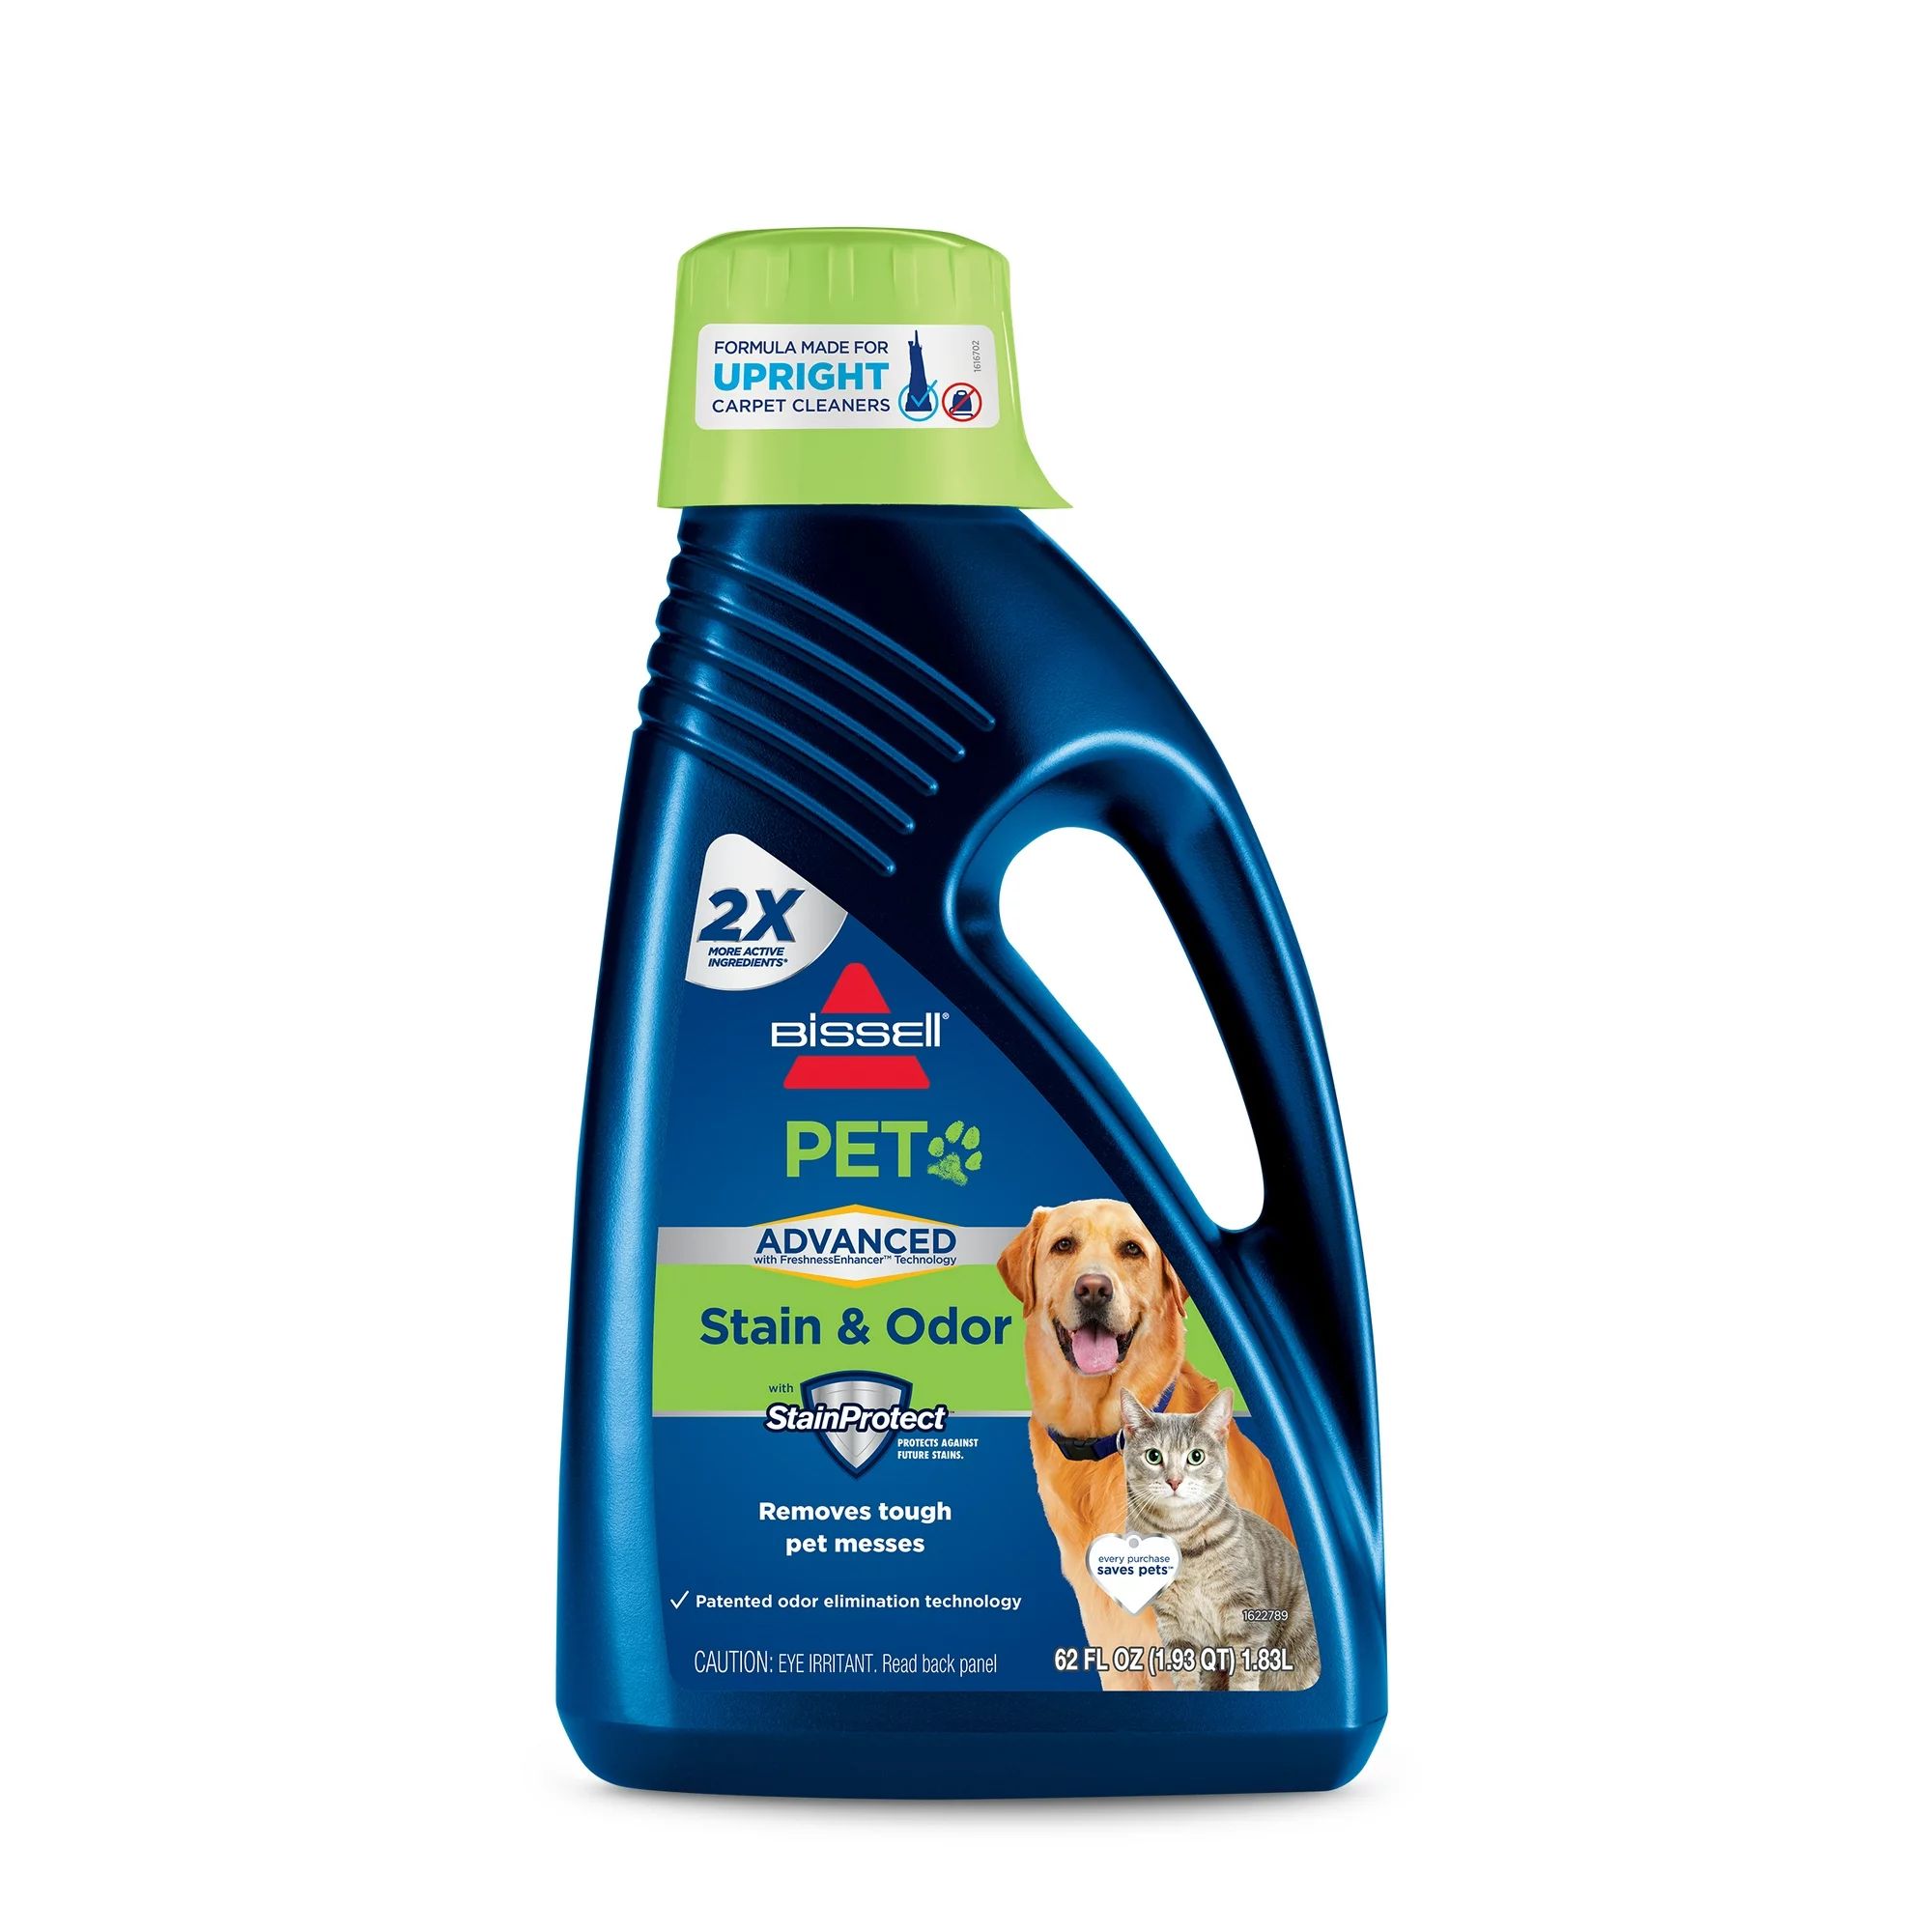 BISSELL ADVANCED PET Stain & Odor Formula for Full Size Carpet Cleaning, 62 oz, 88N2 | Walmart (US)